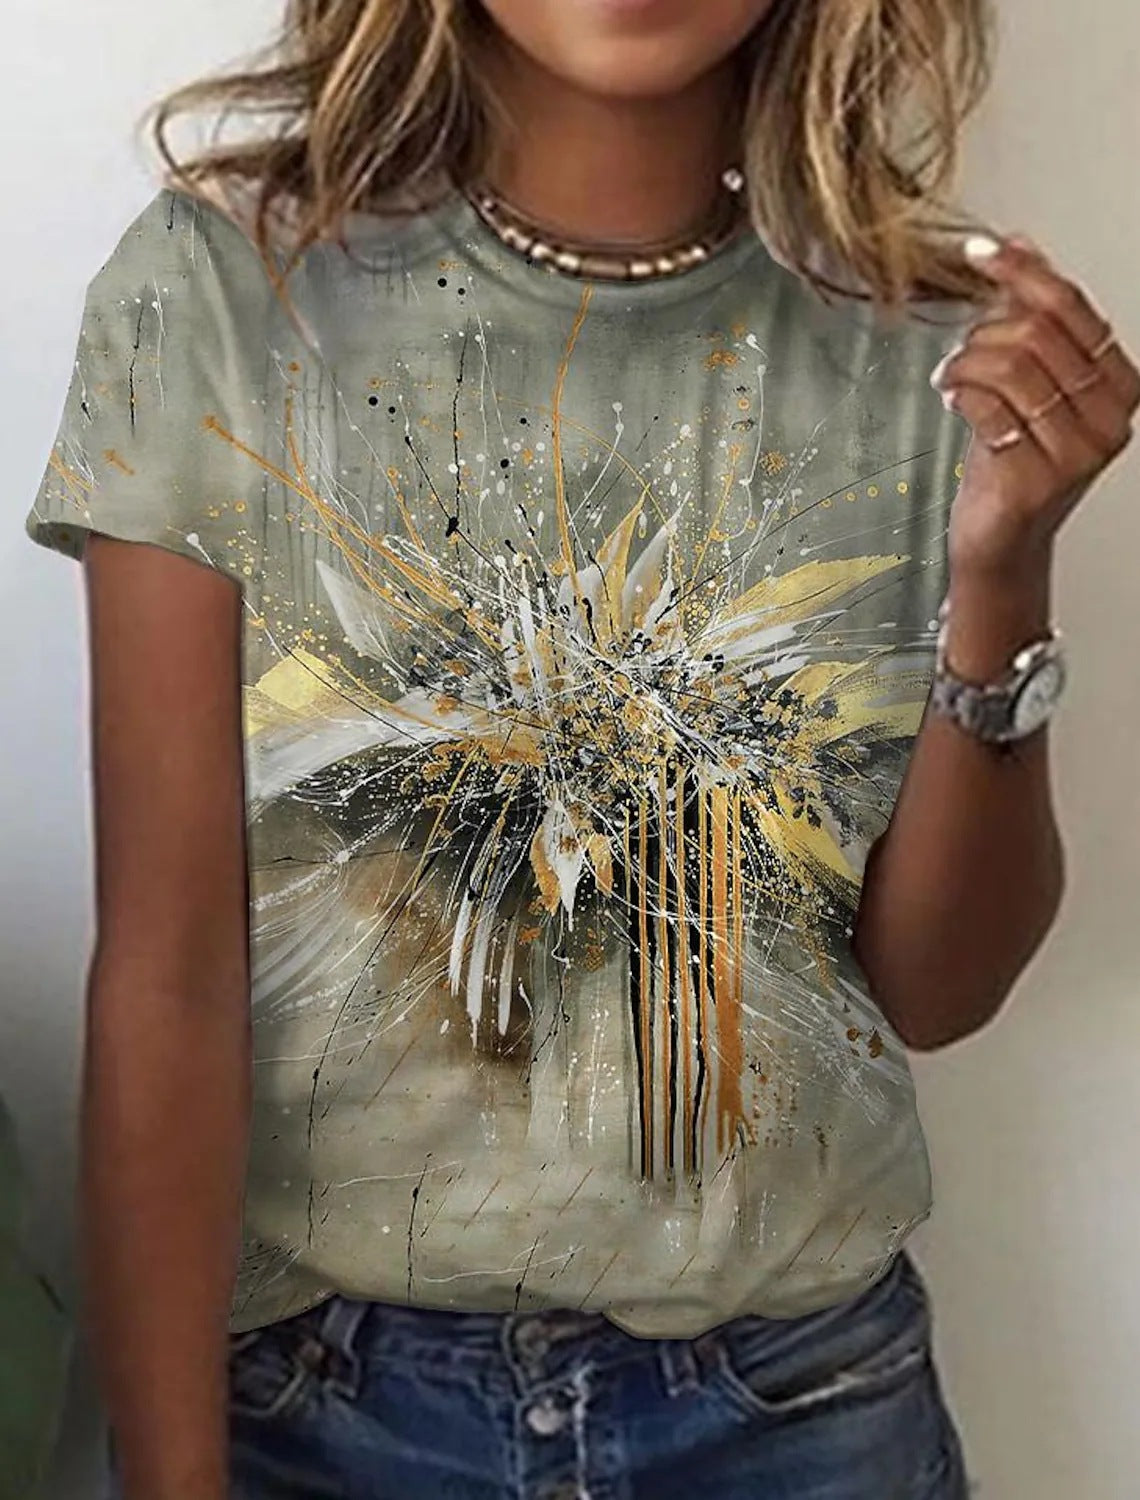 Women's European And American New Abstract Retro Print Short Sleeves